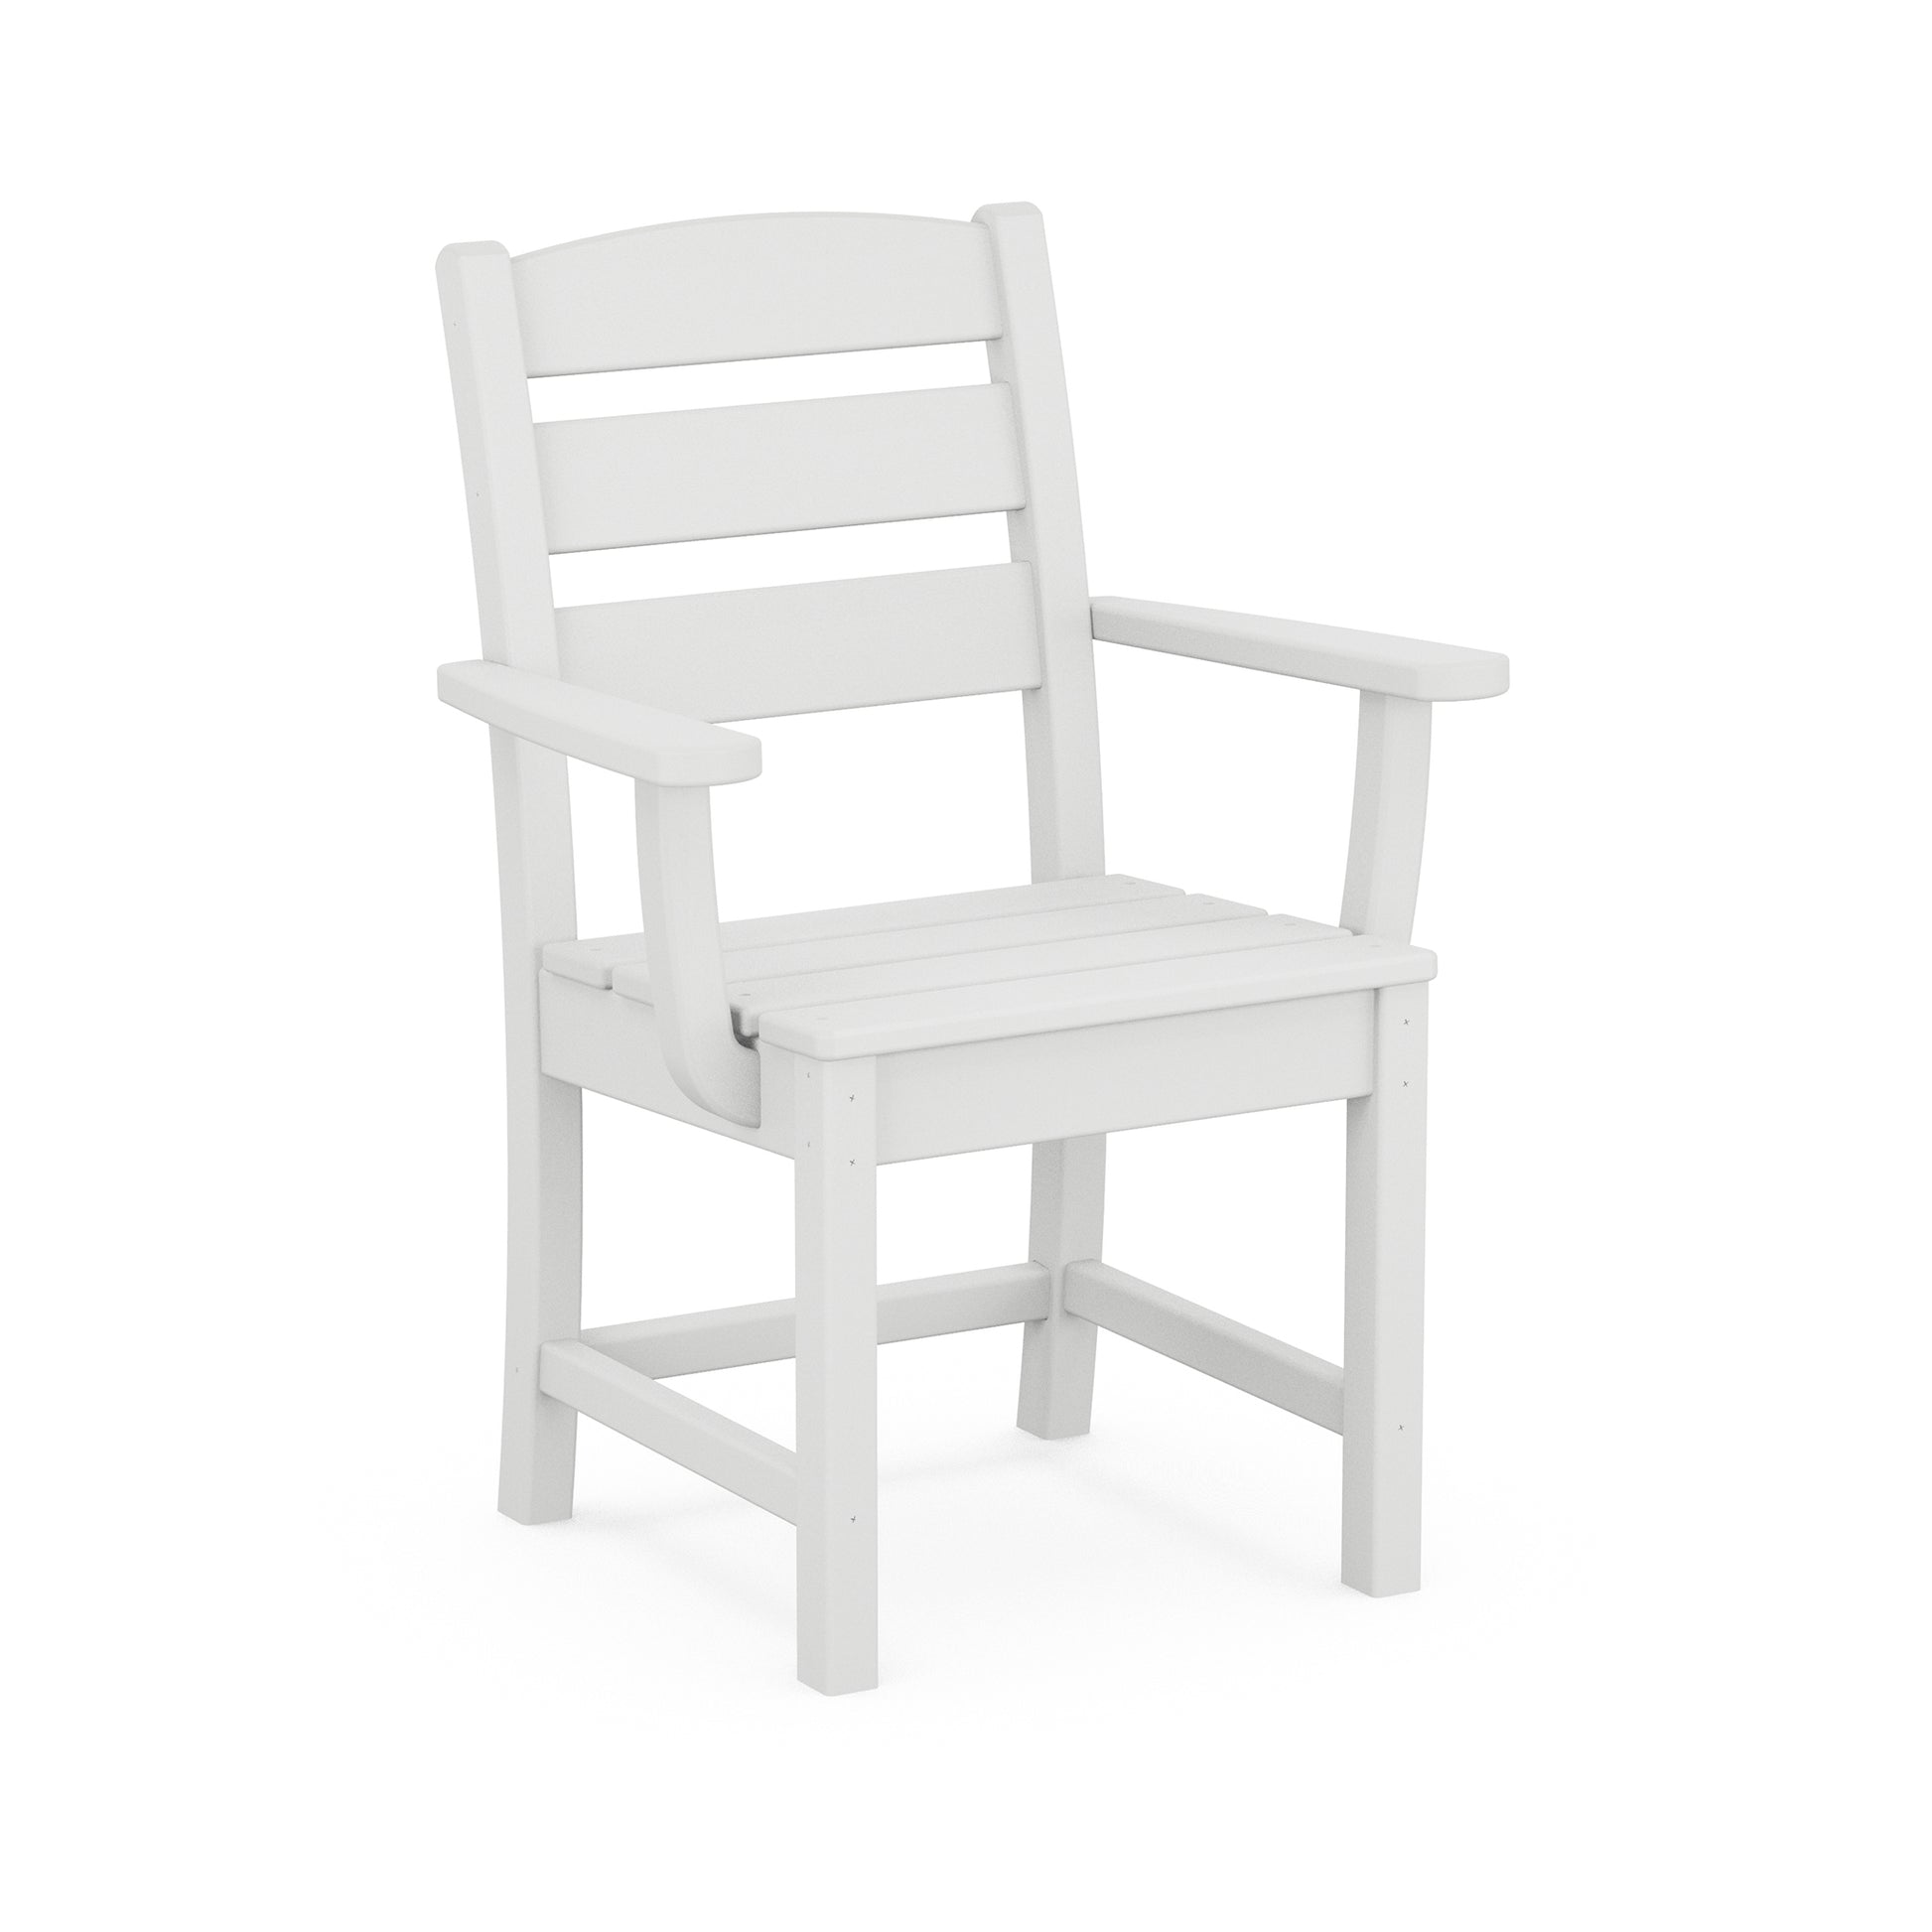 A white, traditional-style POLYWOOD Lakeside Dining Arm Chair with armrests, constructed of POLYWOOD® lumber, shown against an all-white background.